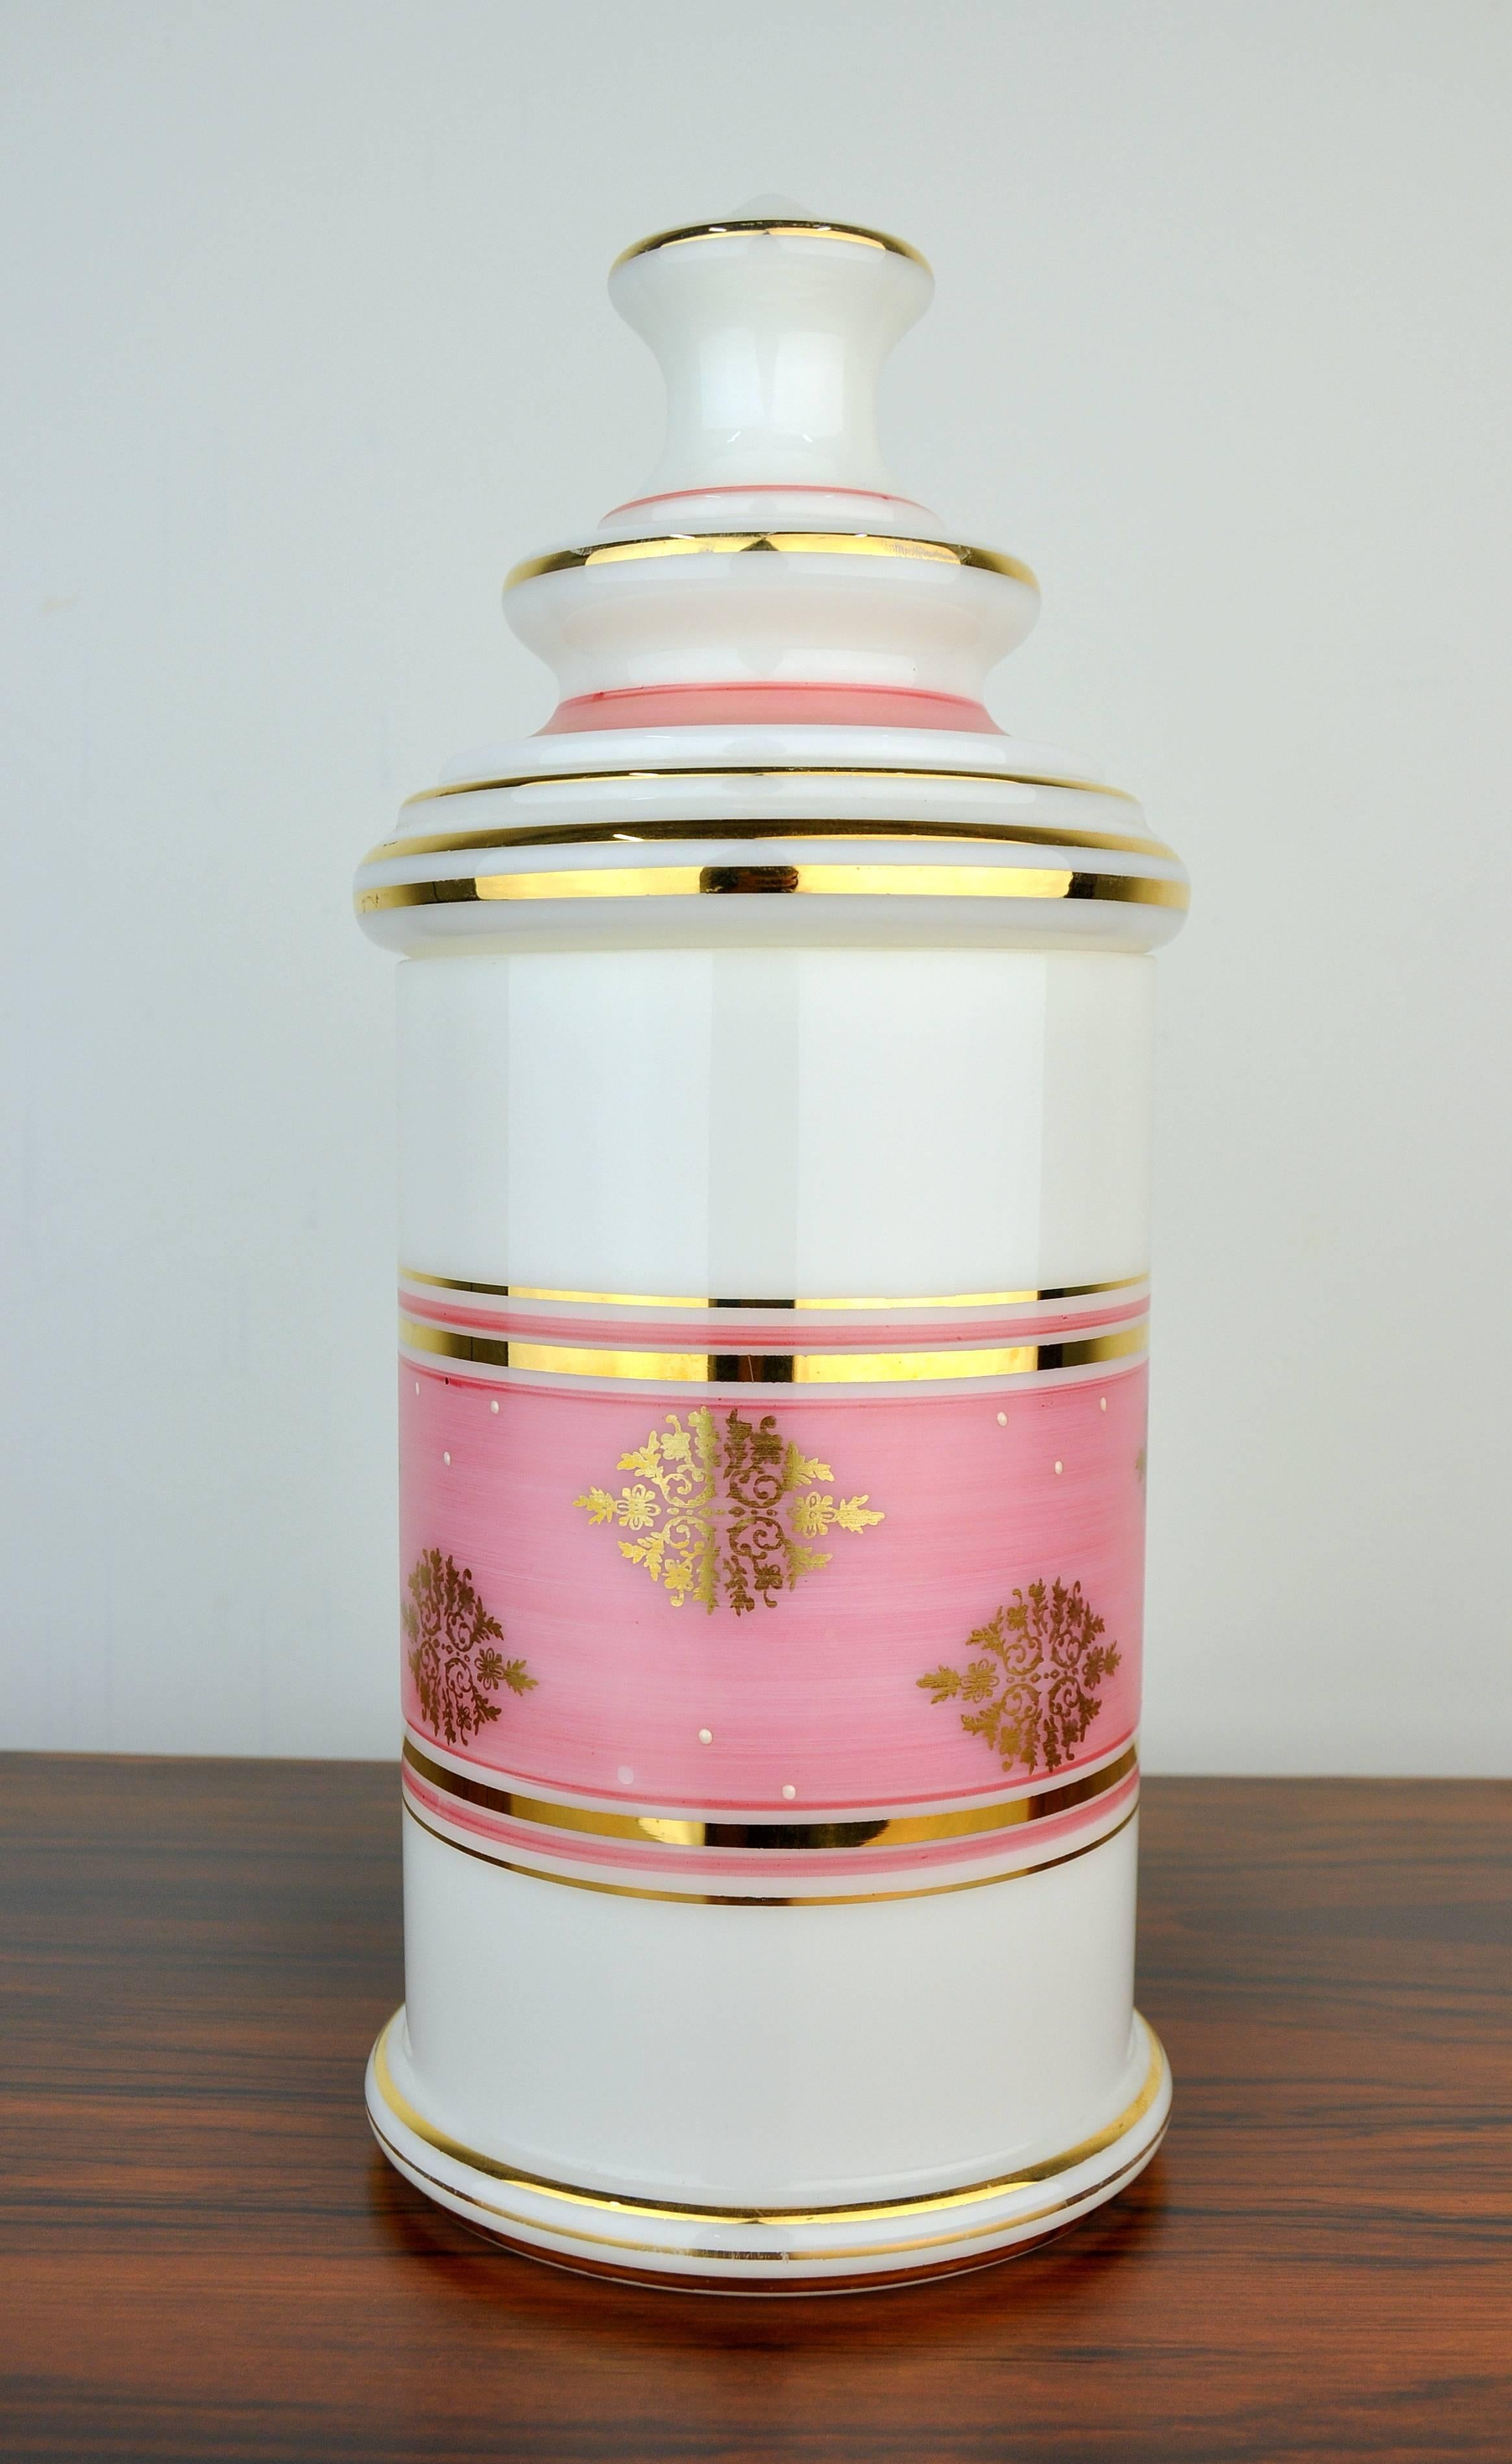 A superb large-scale 19th century example of an antique French enameled, gilt and painted opaline glass apothecary or dresser jar, attributed to Baccarat. The white opaline glass is decorated with alternating pink and gilded bands, and further